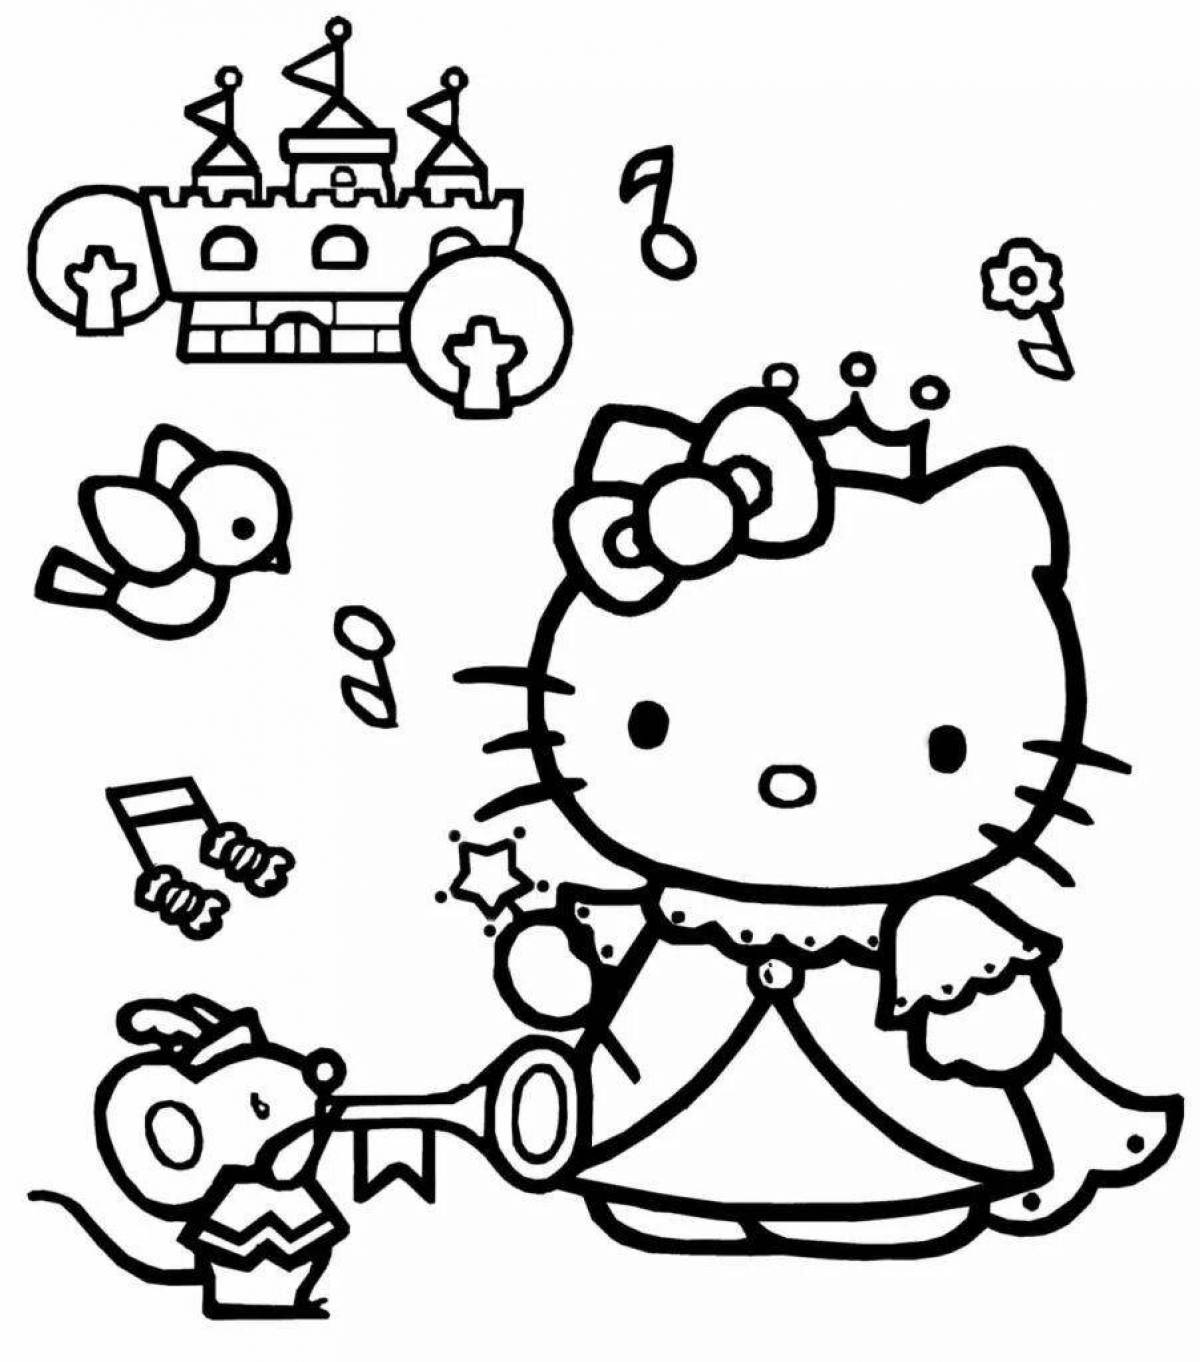 Tiny kitty cat coloring book